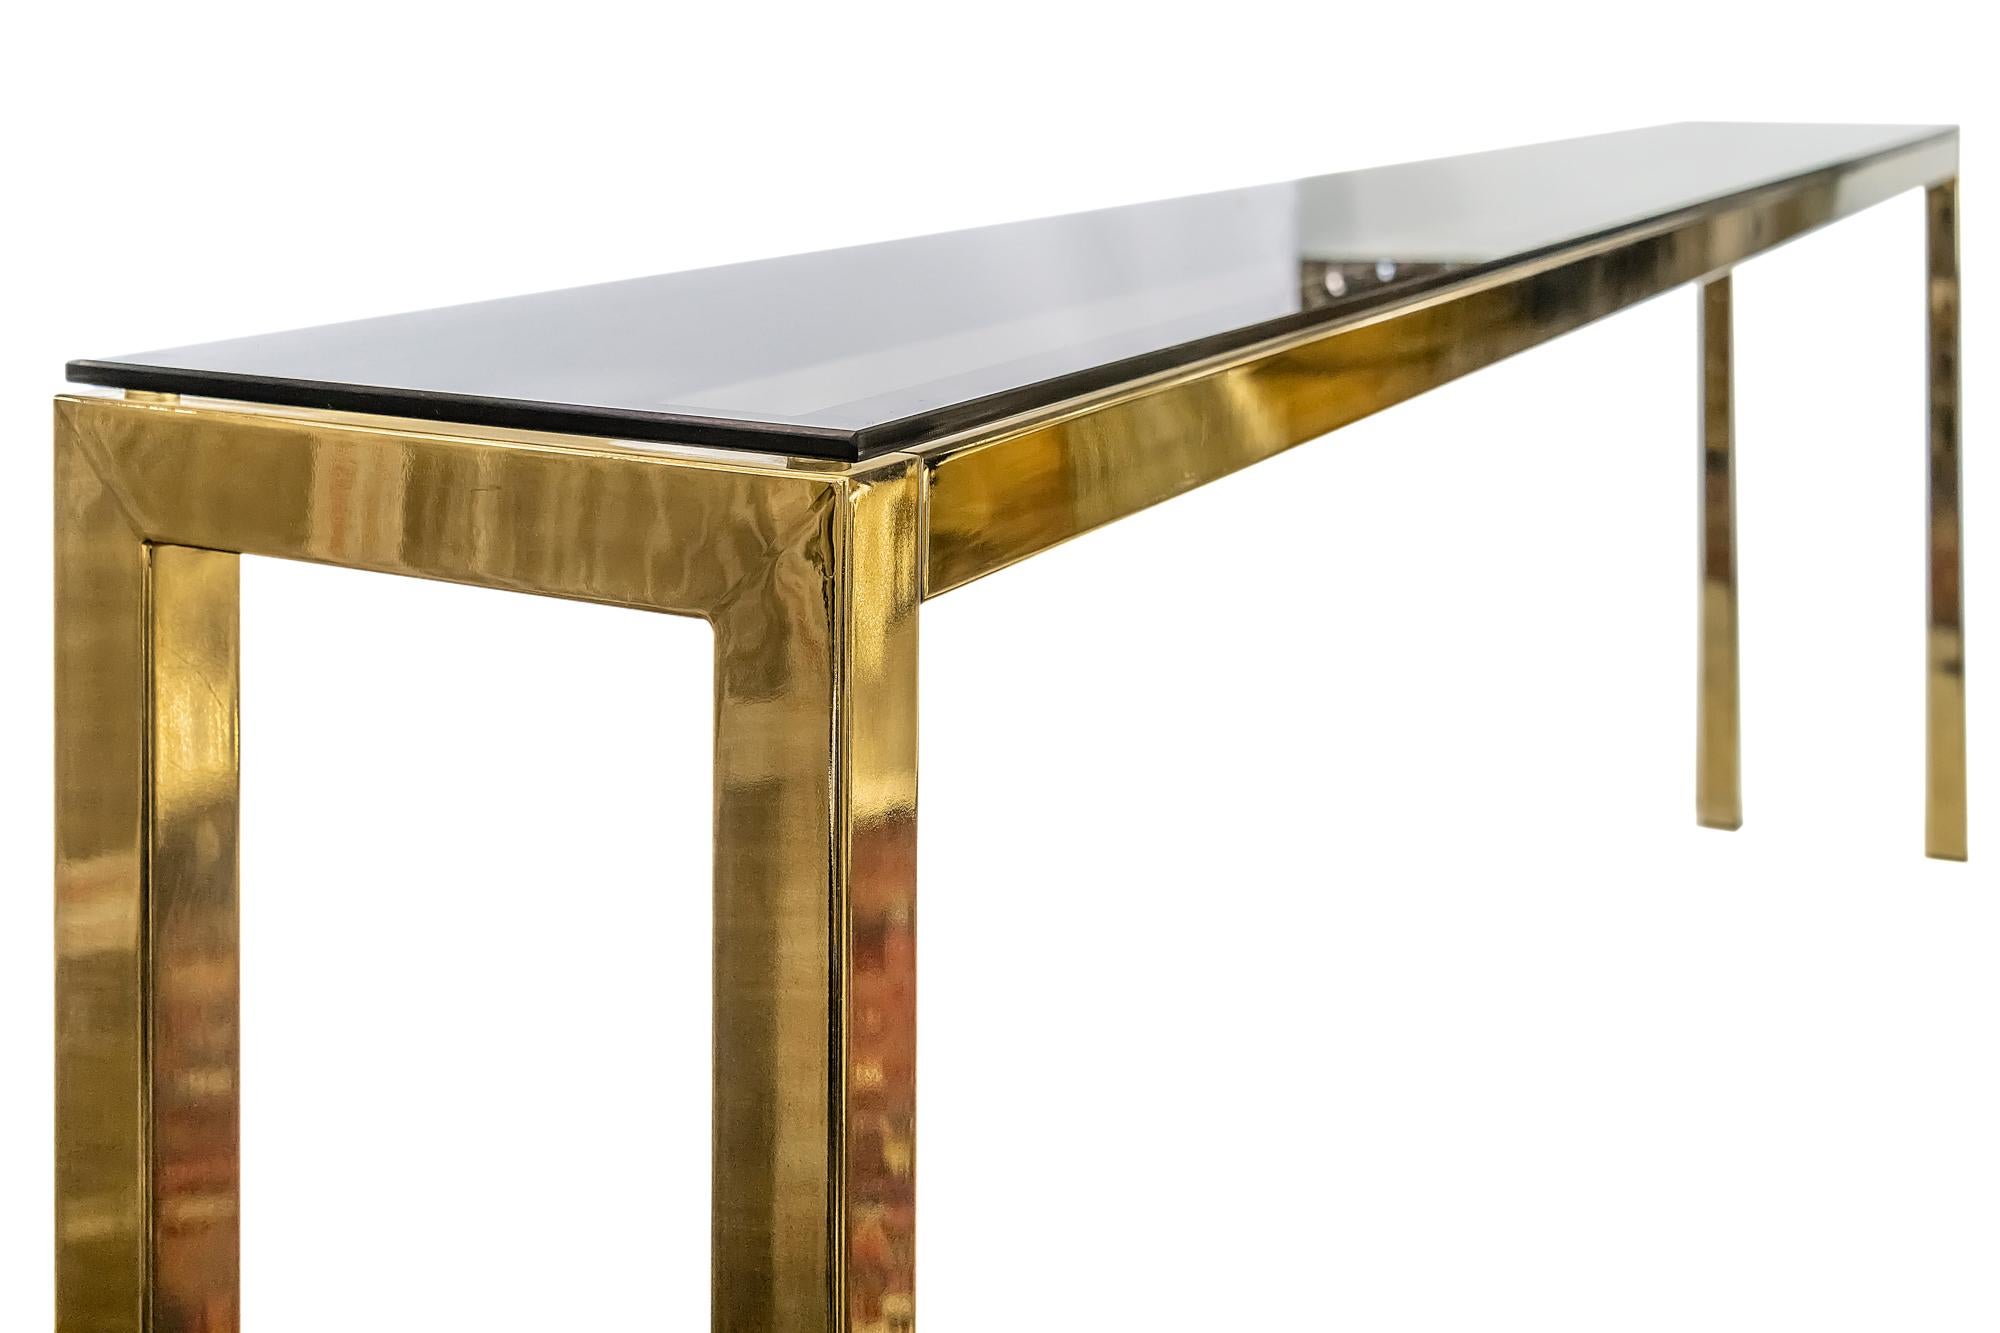 Midcentury metal and glass console table by Belgo Chrome.
Metal is brass plated.
The top glass is smoky brown color.
This console is extra long and very stabile.
 